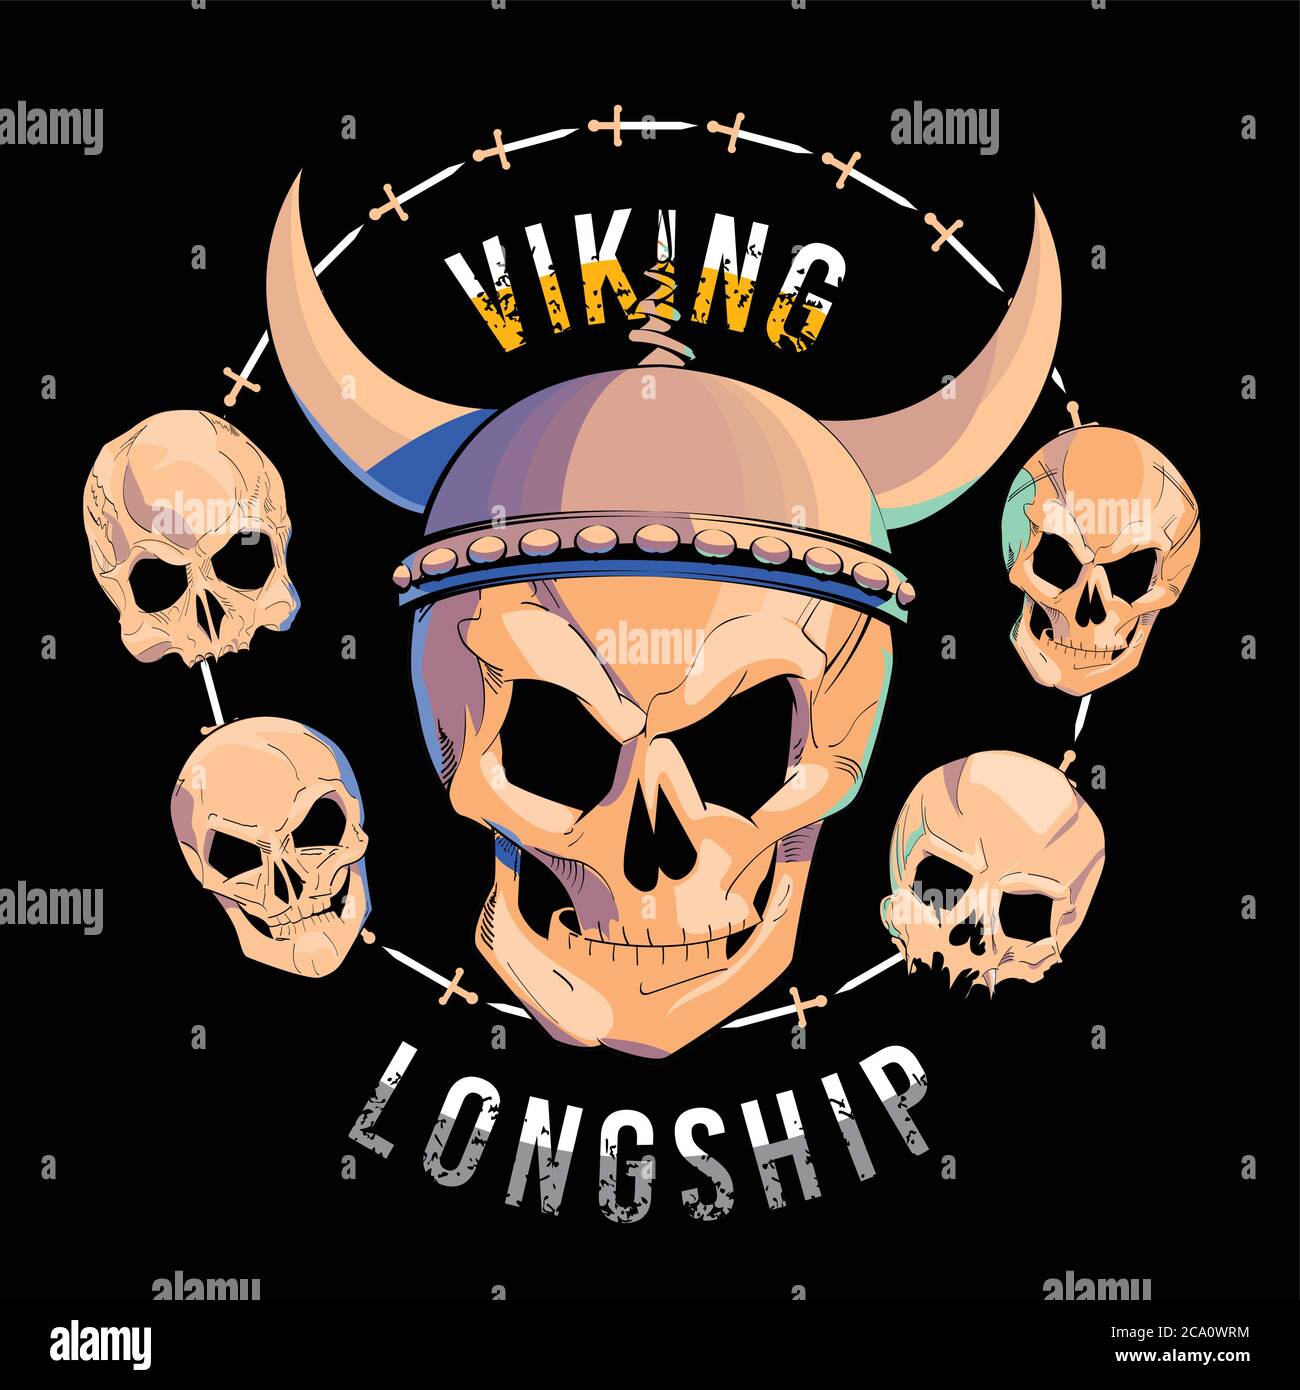 vector illustration of a skull with viking helmet surrounded by small skulls on black background. Head drawing for t-shirts or posters. Stock Vector